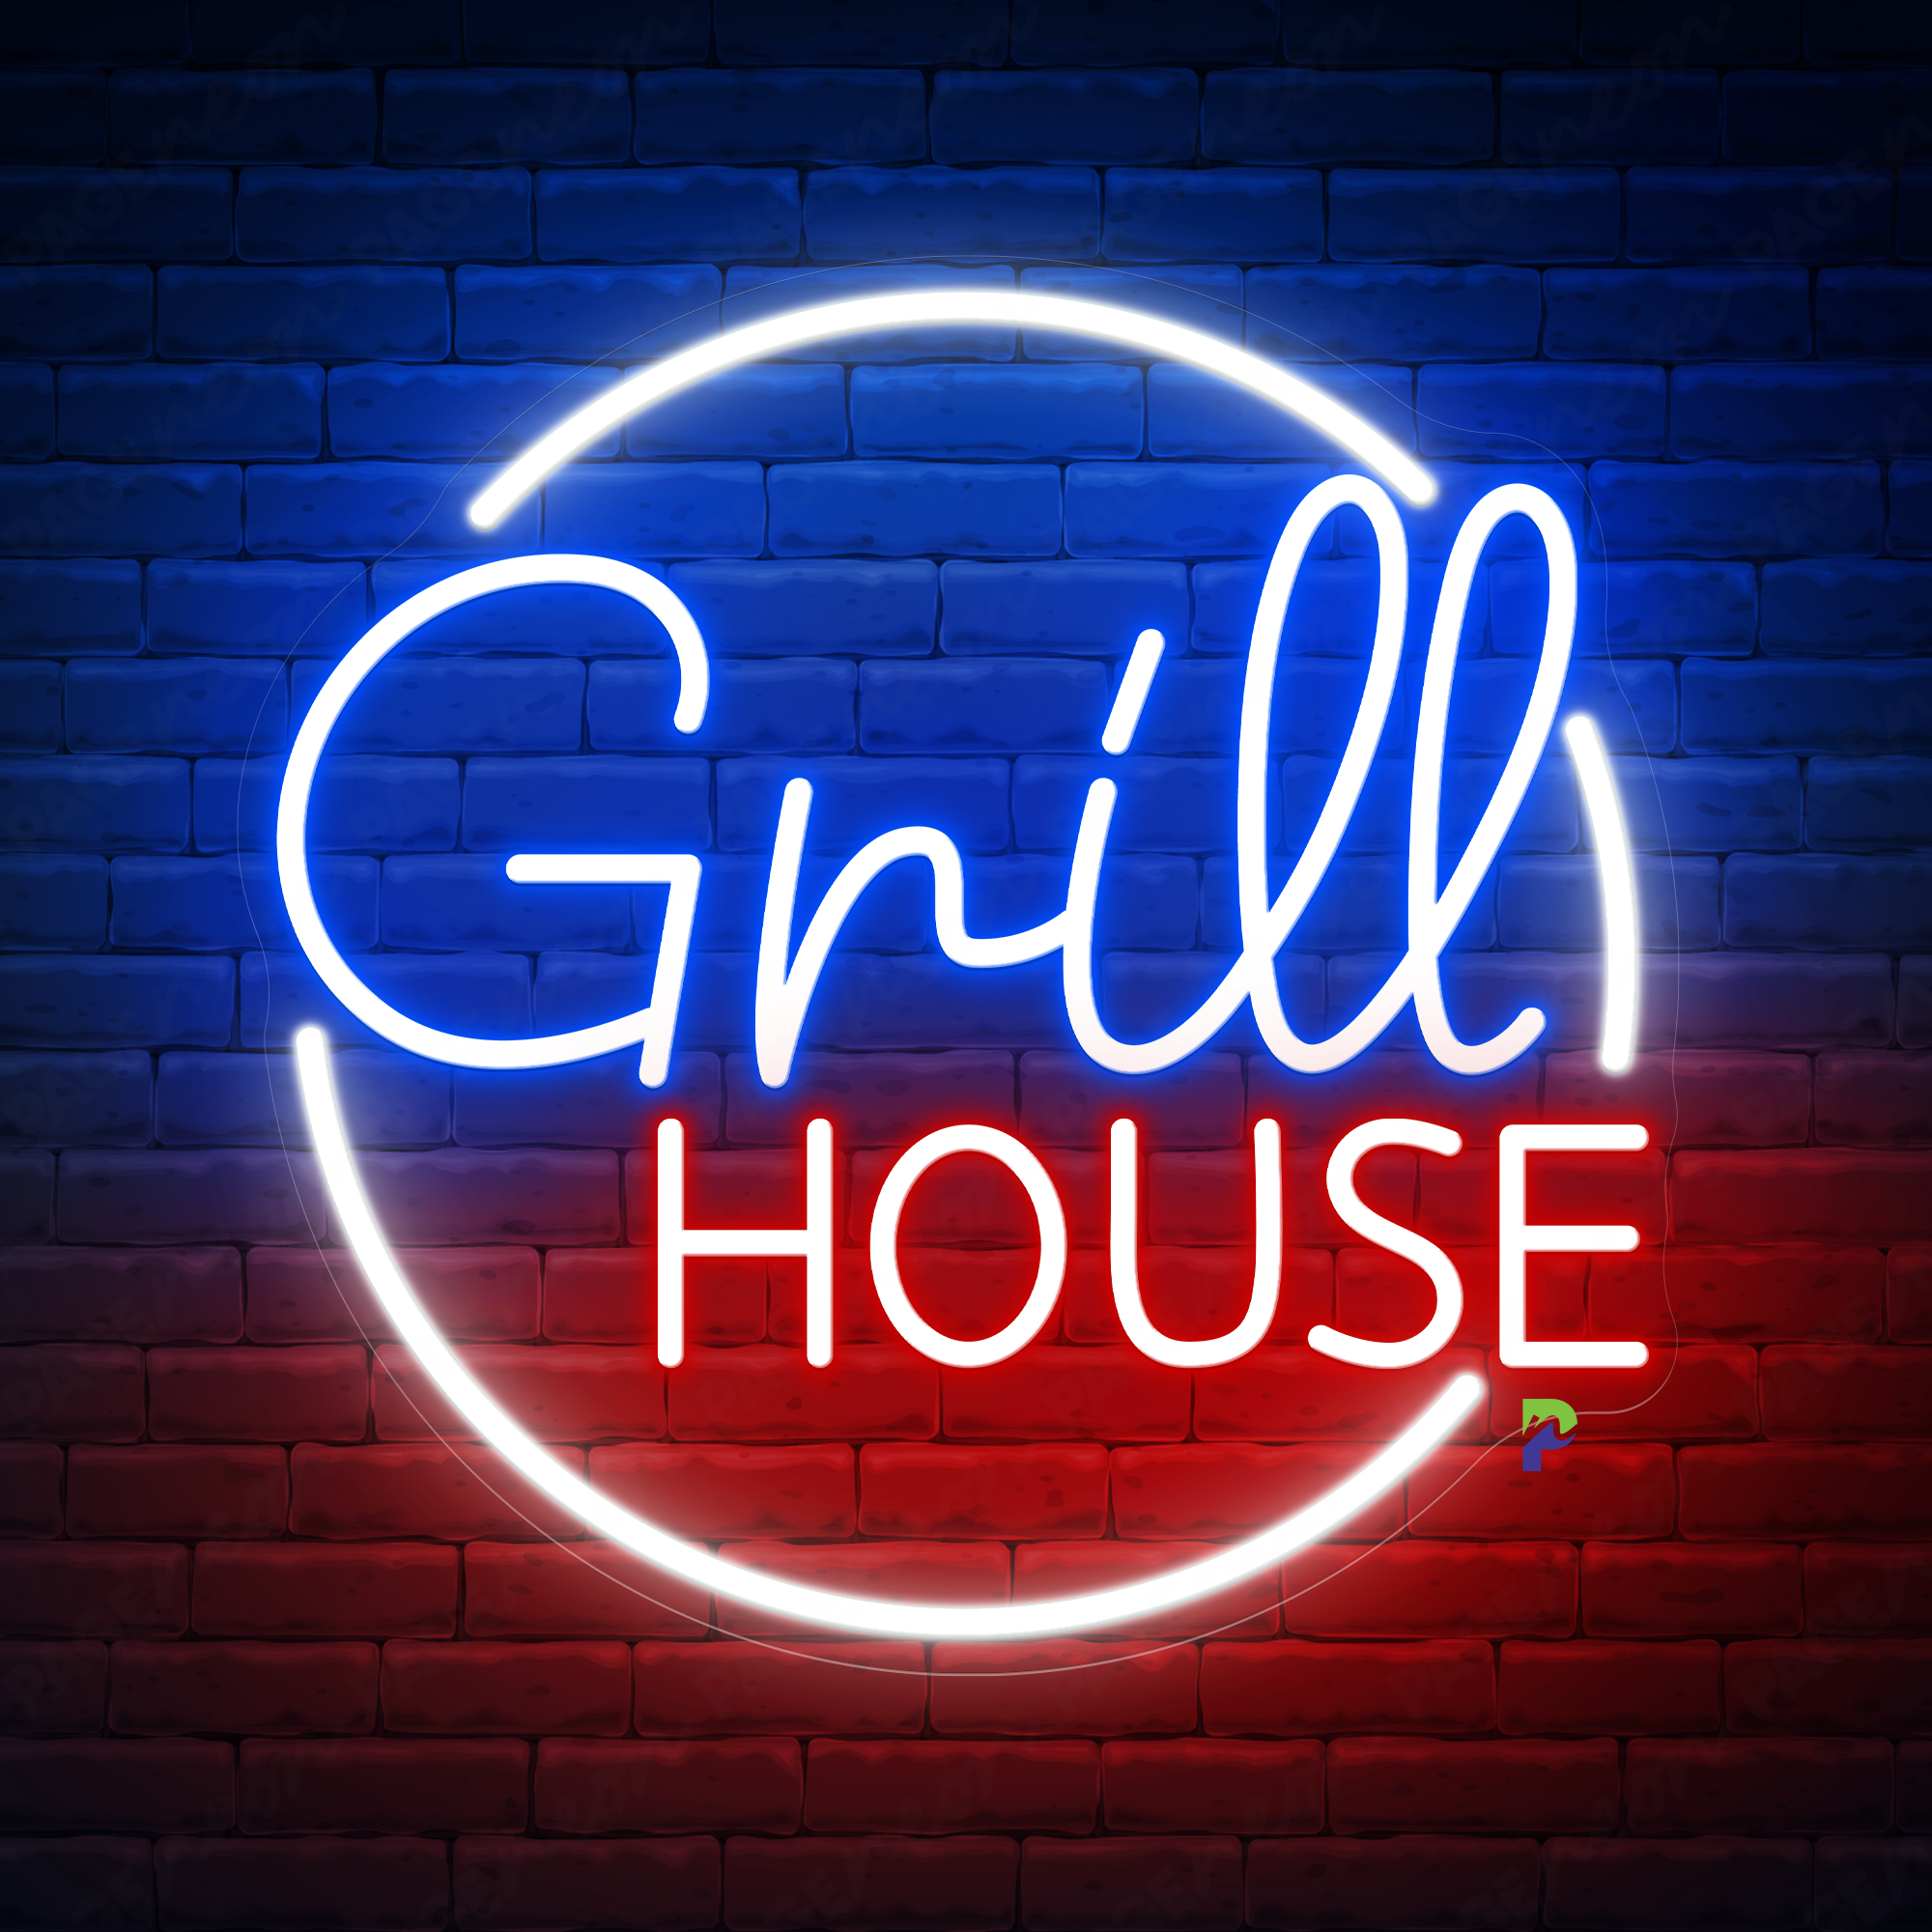 Grill House Neon Sign Business Led Light